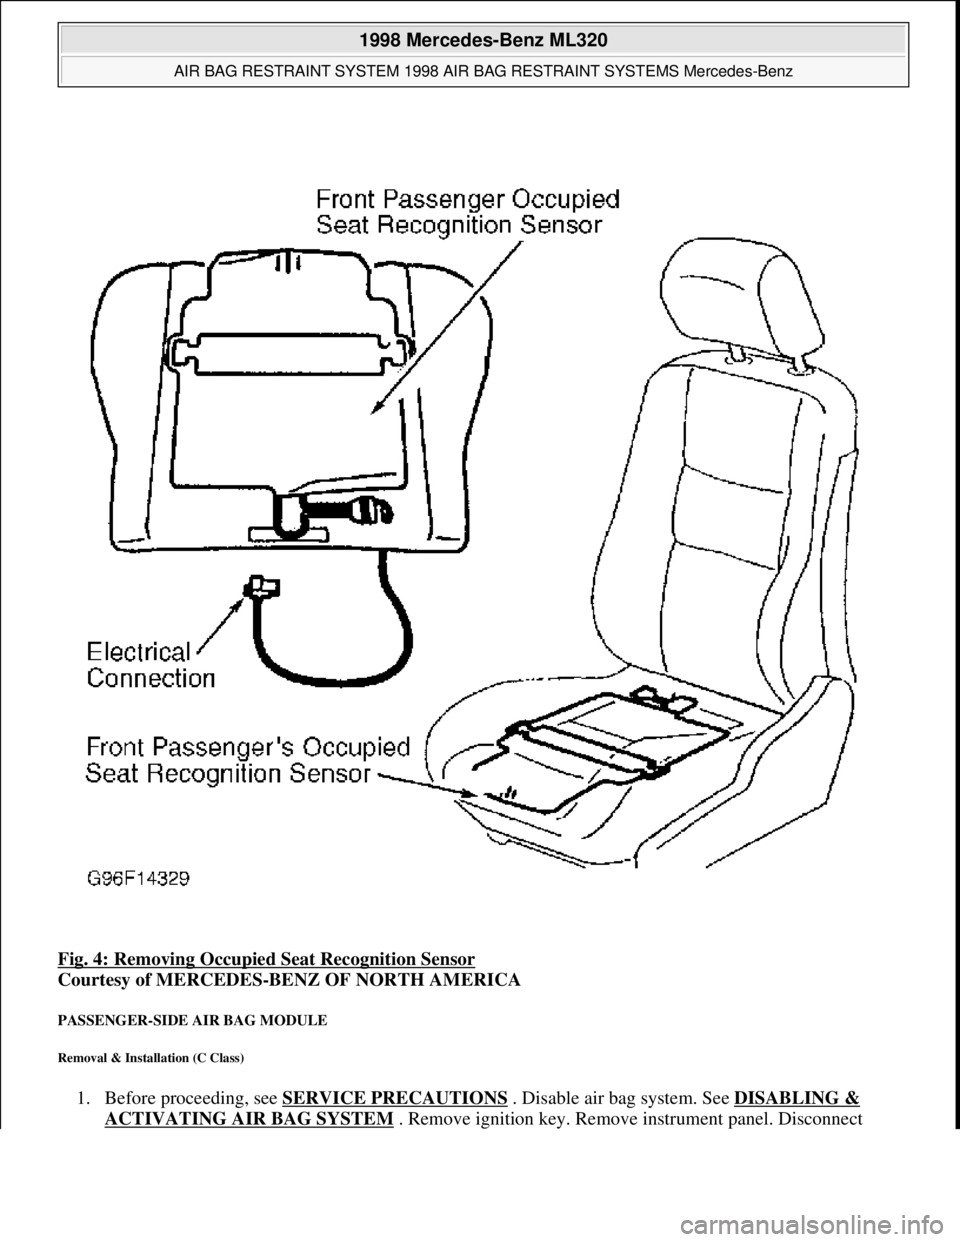 MERCEDES-BENZ ML430 1997  Complete Repair Manual Fig. 4: Removing Occupied Seat Recognition Sensor  
Courtesy of MERCEDES-BENZ OF NORTH AMERICA   
PASSENGER-SIDE AIR BAG MODULE 
Removal & Installation (C Class) 
1. Before proceeding, see SERVICE PRE